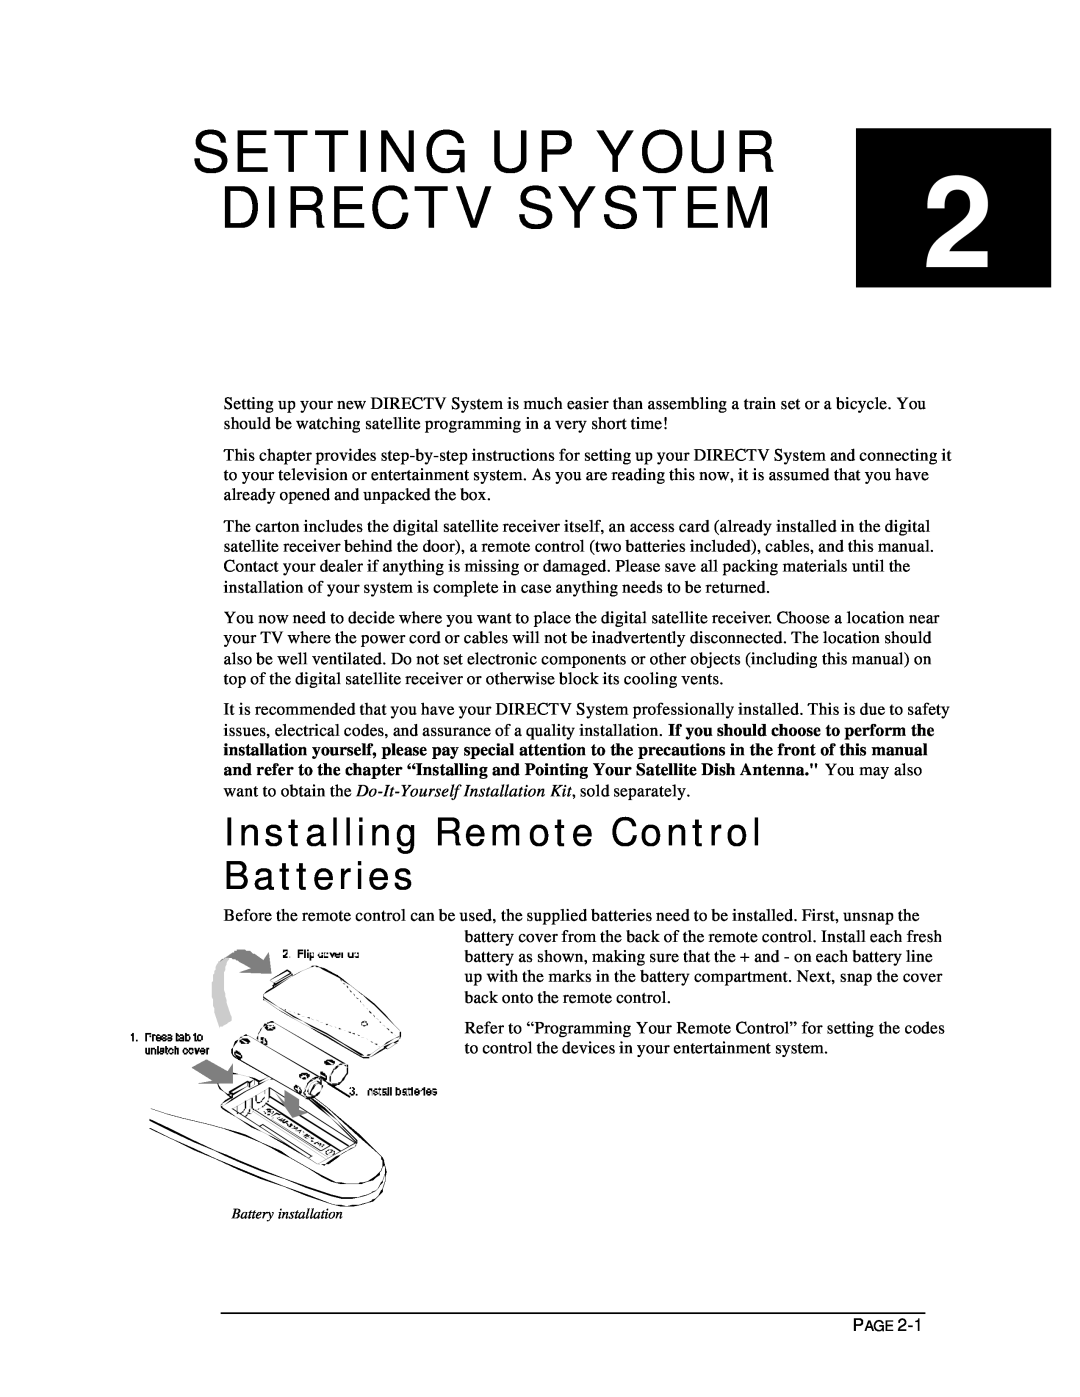 DirecTV HIRD-D11, HIRD-D01 owner manual Setting Up Your, Directv System, Installing Remote Control Batteries 